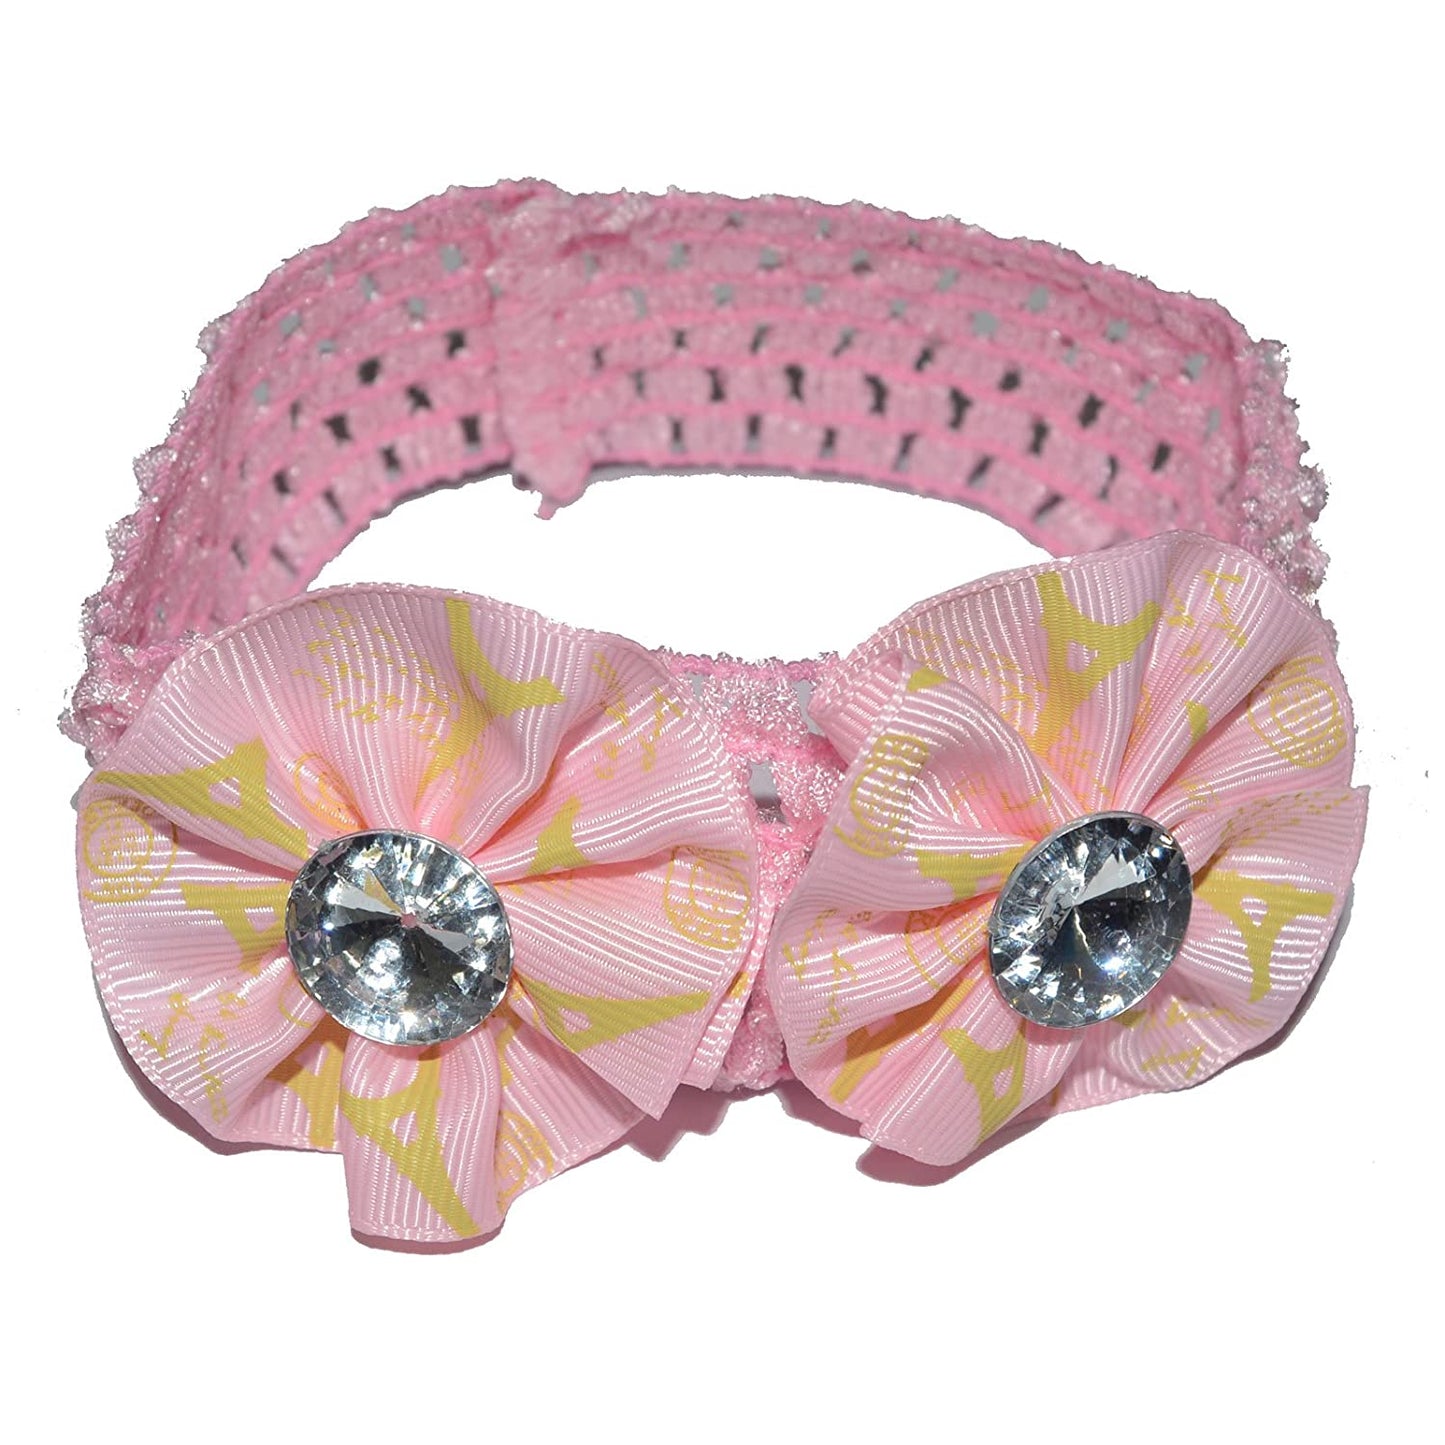 Floral Soft Stretchy Headbands for Baby Girls and Newborn (17-08 Baby Pink Baby Headband)